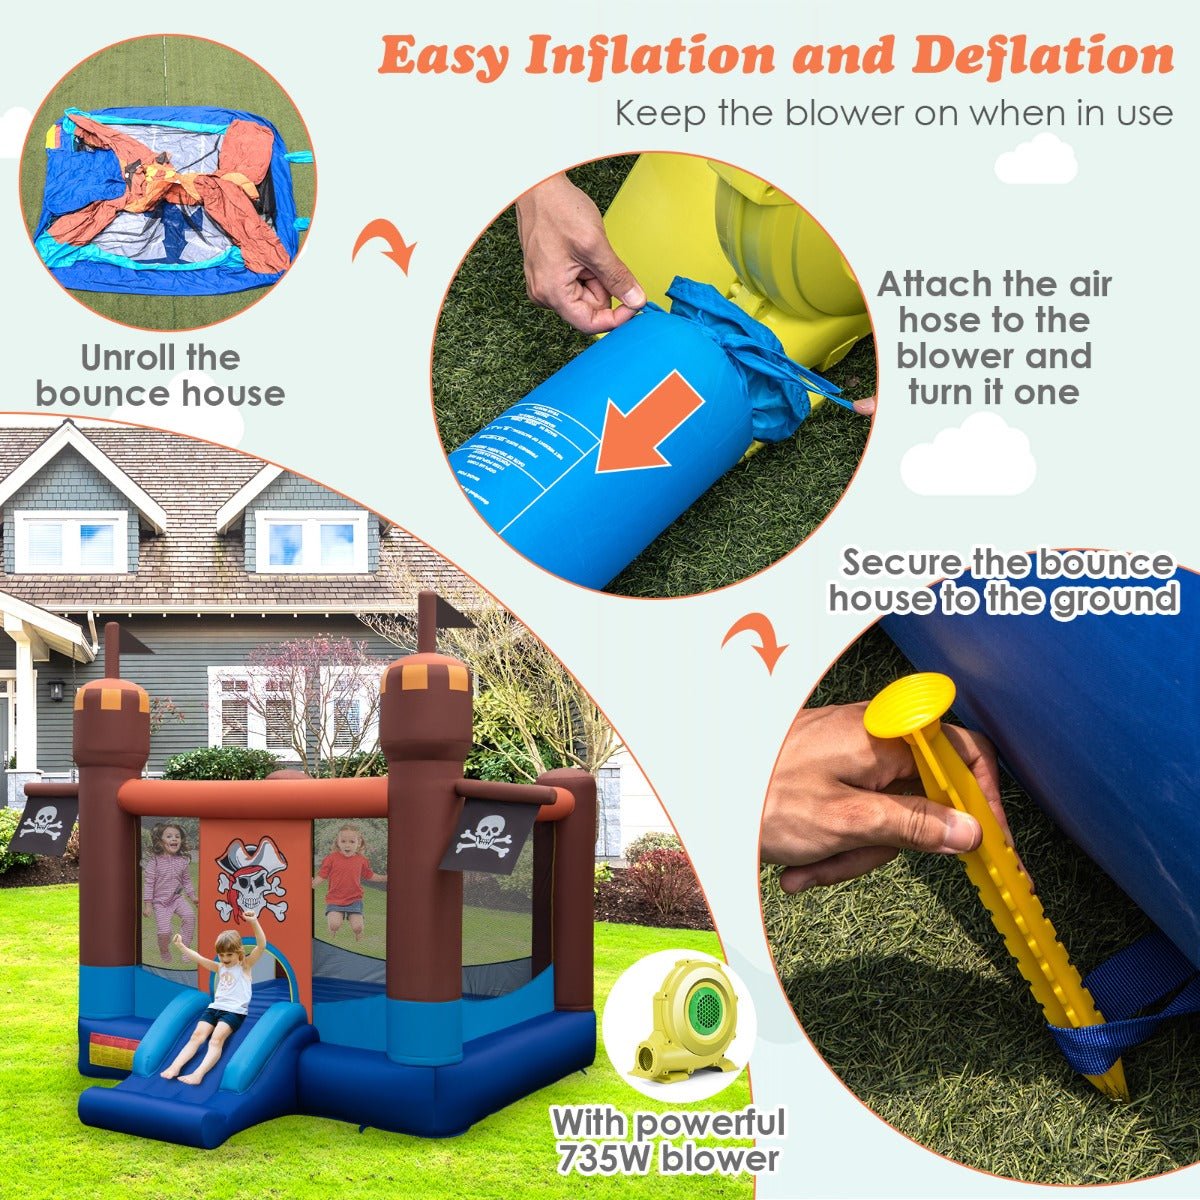 Kids Inflatable Bounce Castle - Outdoor Playtime with Bounce and Hoop